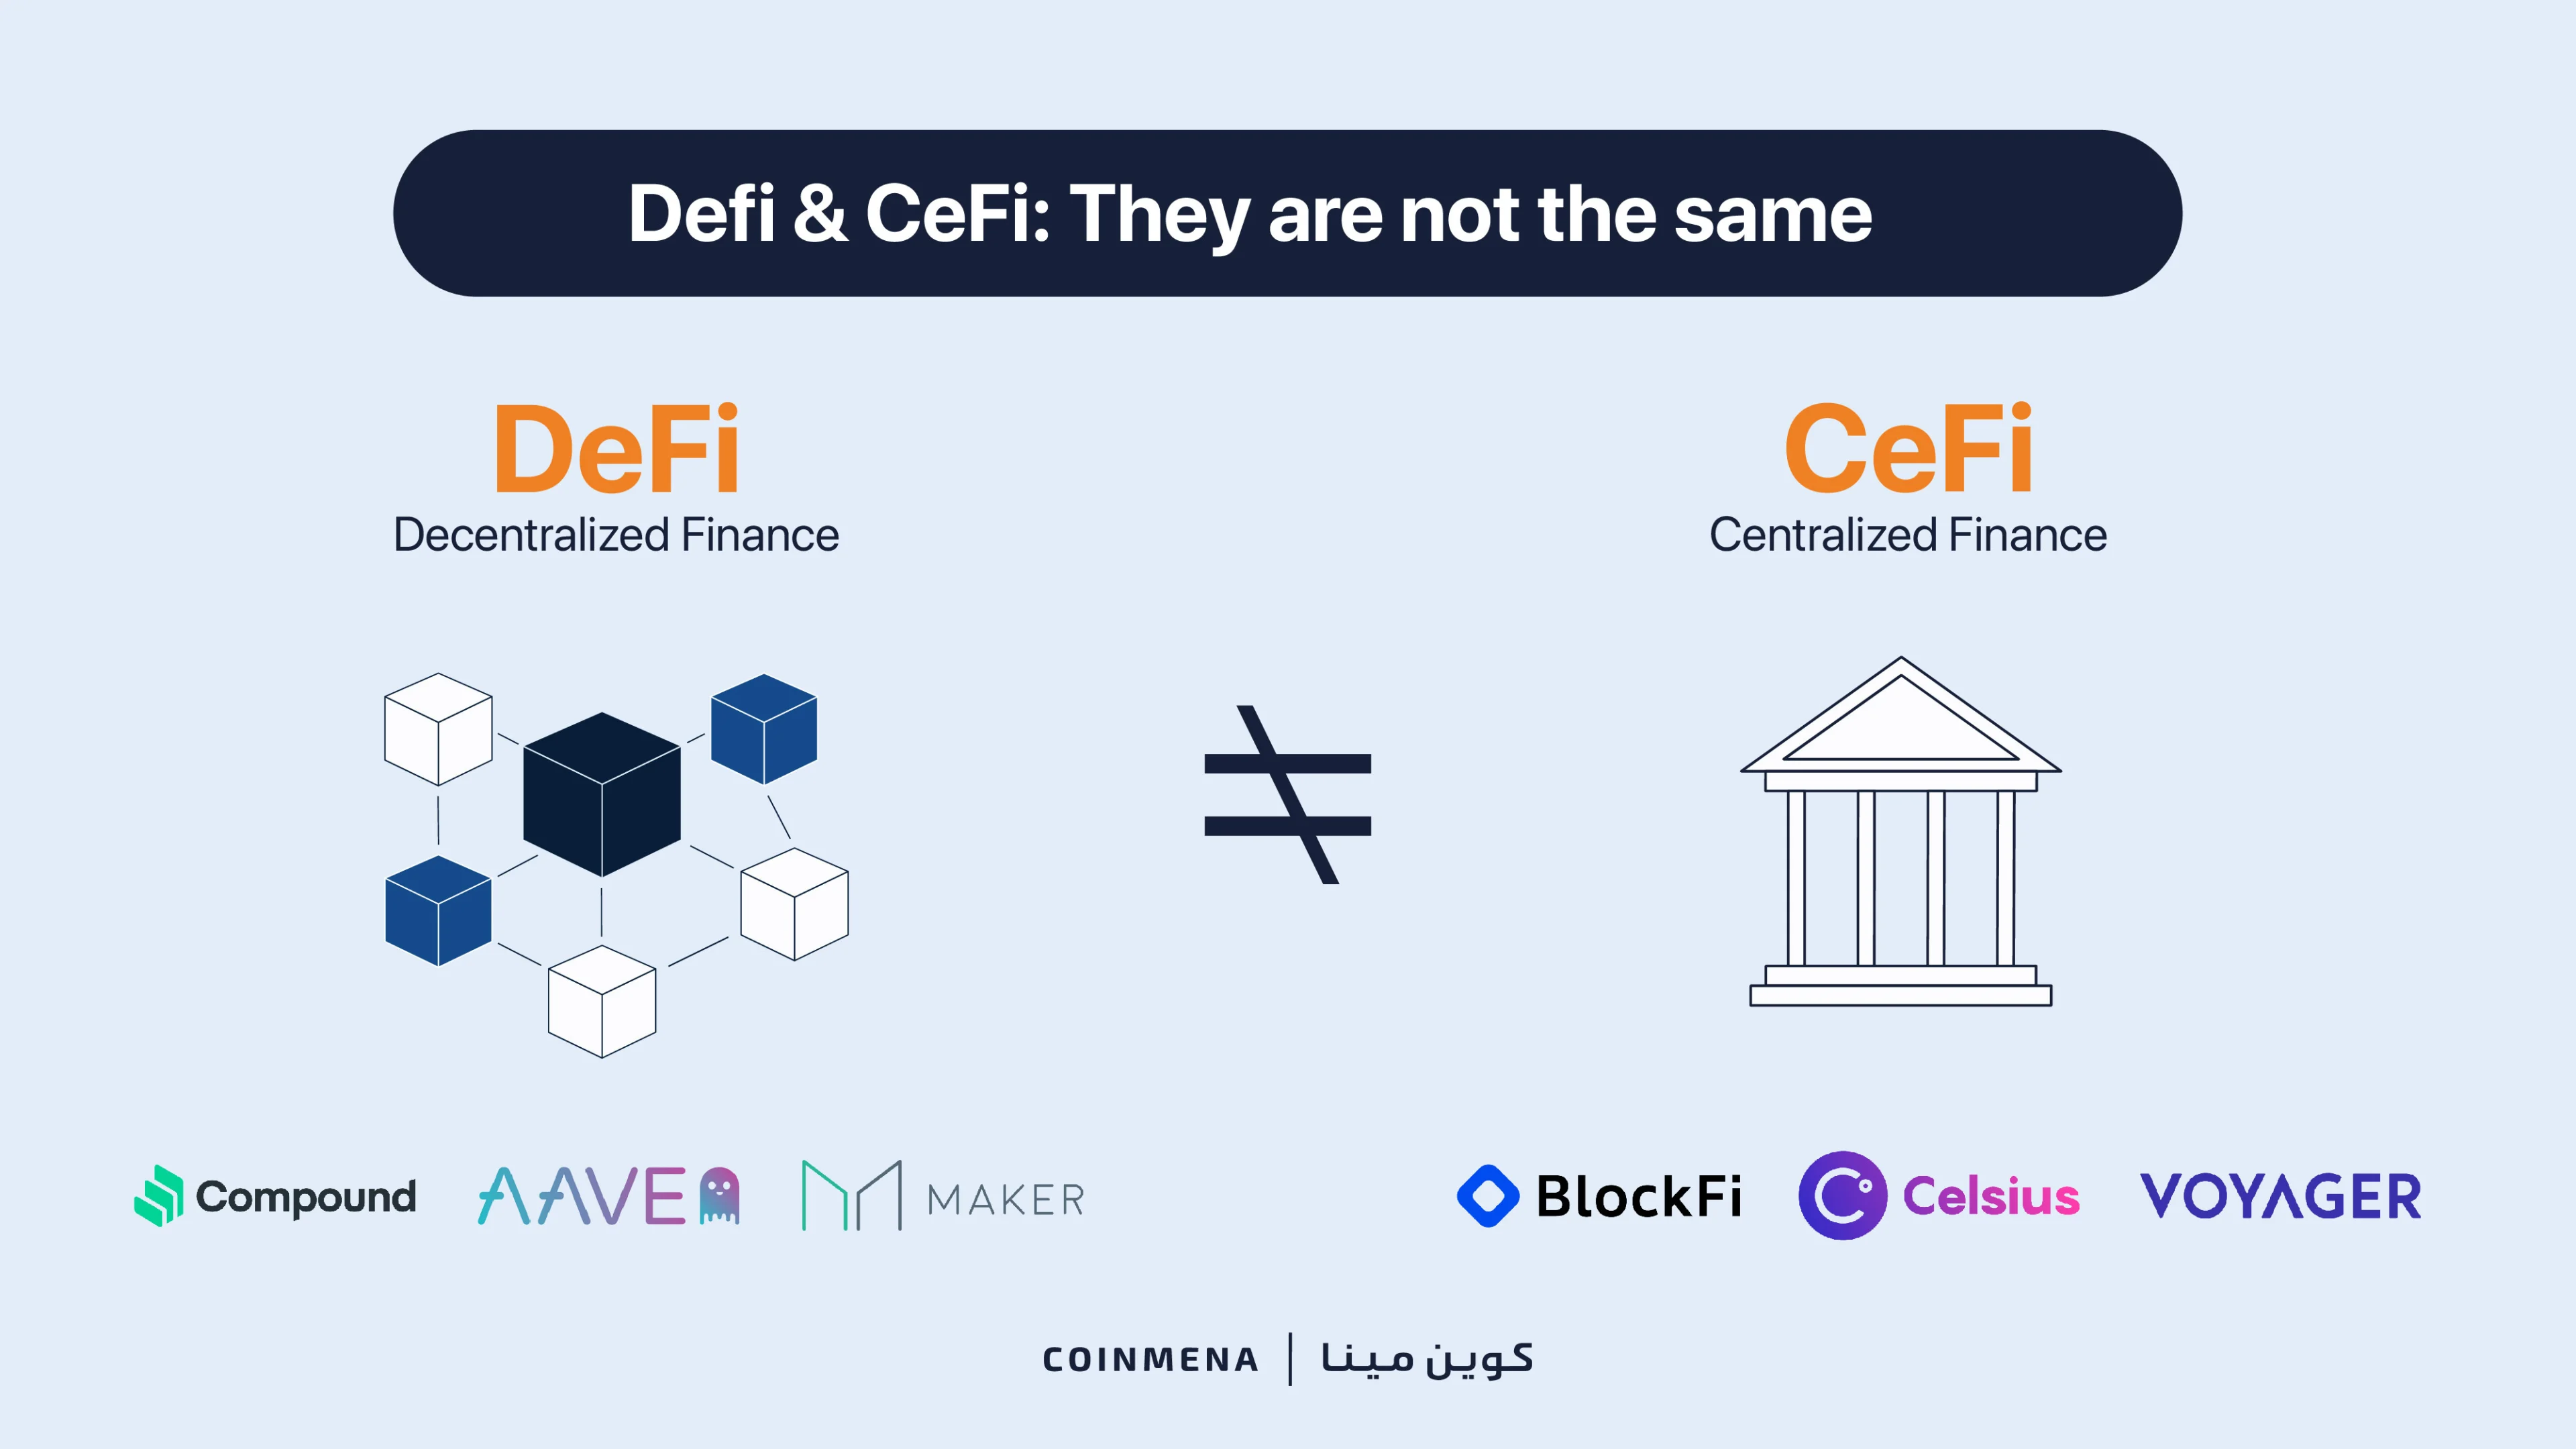 CeFi Is Not DeFi